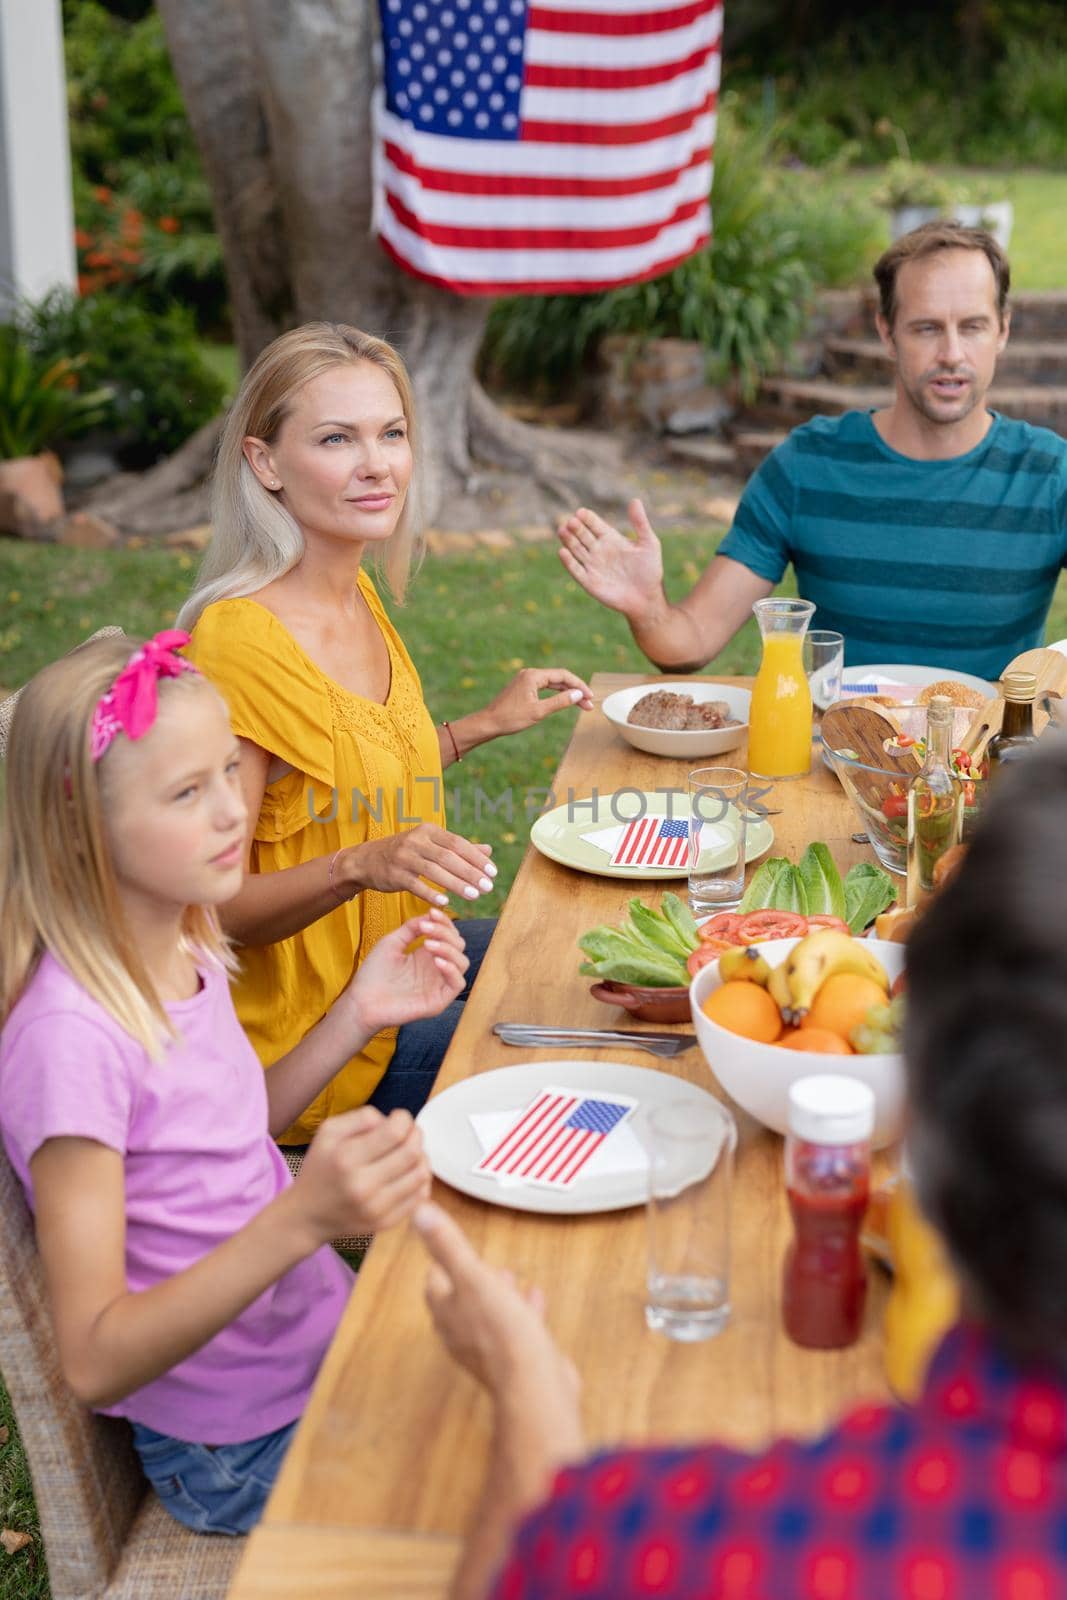 Caucasian man saying grace with family before eating meal together in garden by Wavebreakmedia